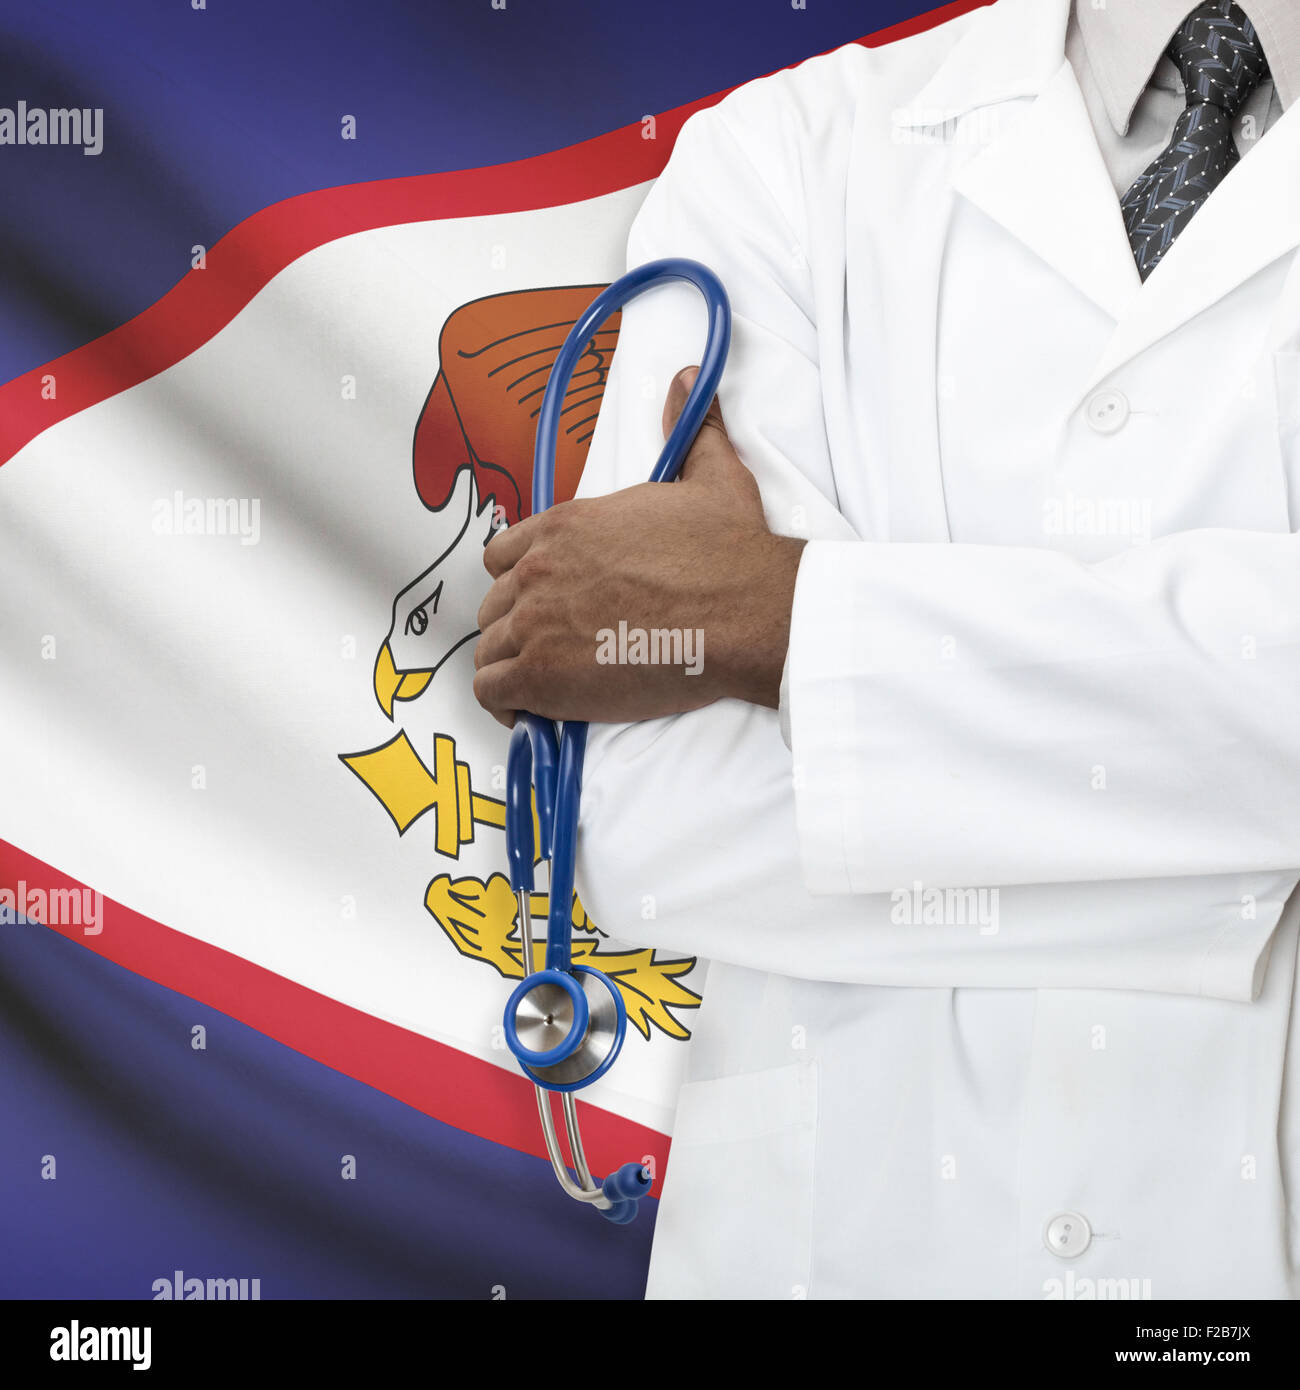 Concept of national healthcare system series - American Samoa Stock Photo